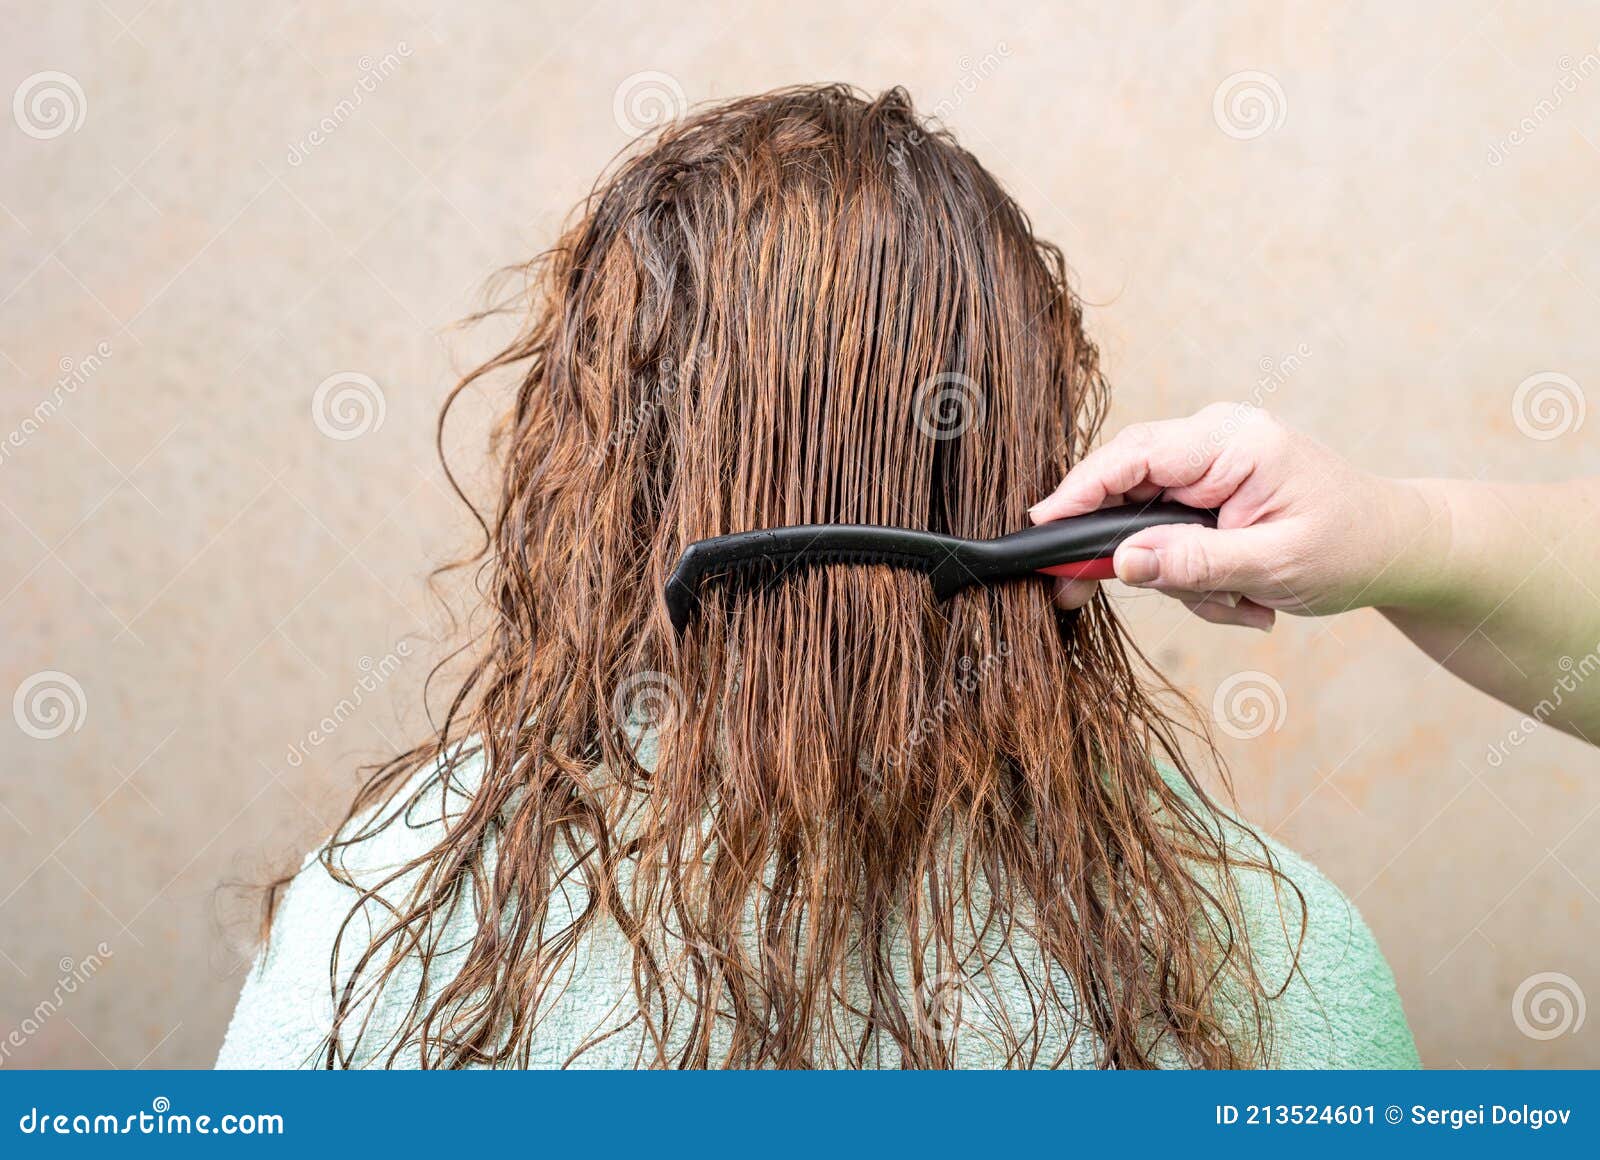 Combing Female Damp Hair with a Dark Comb Stock Image - Image of cosmetics,  accessory: 213524601